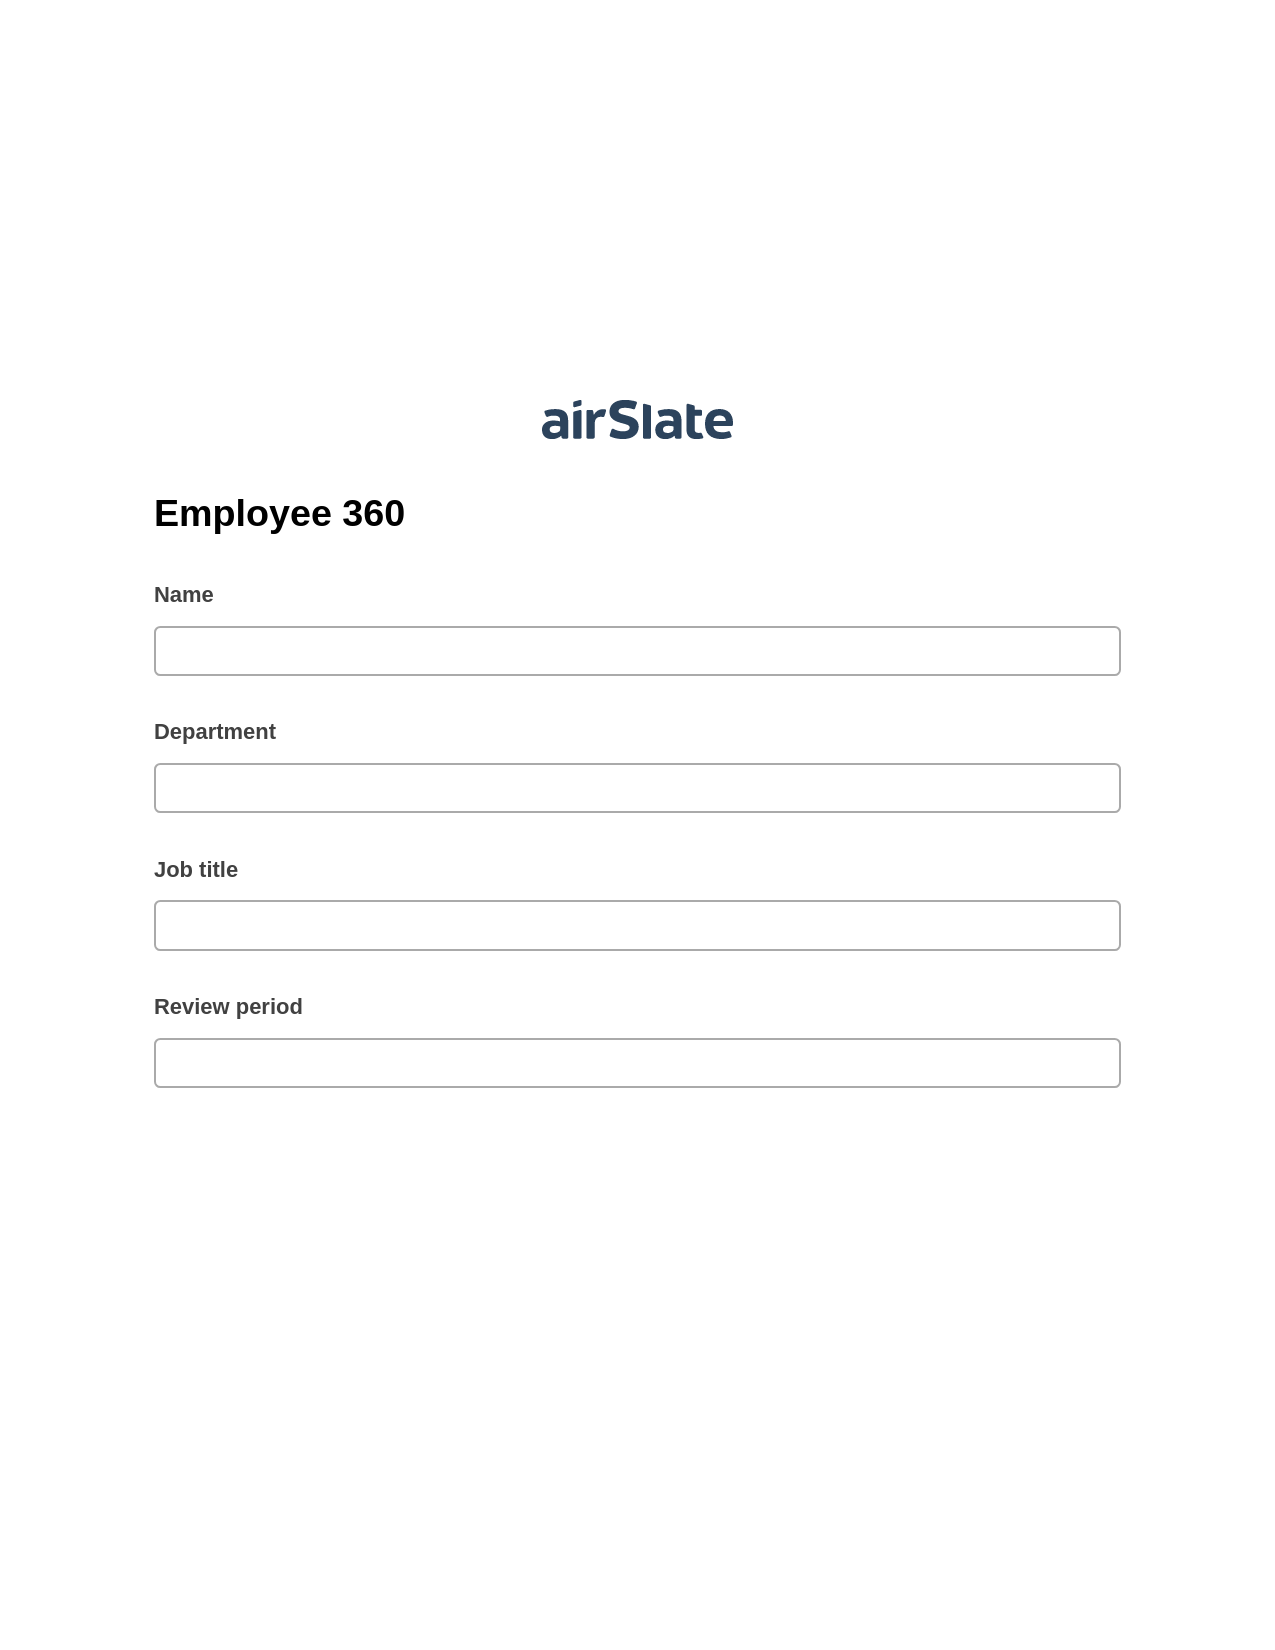 Multirole Employee 360 Pre-fill from MS Dynamics 365 Records, Jira Bot, Export to NetSuite Bot